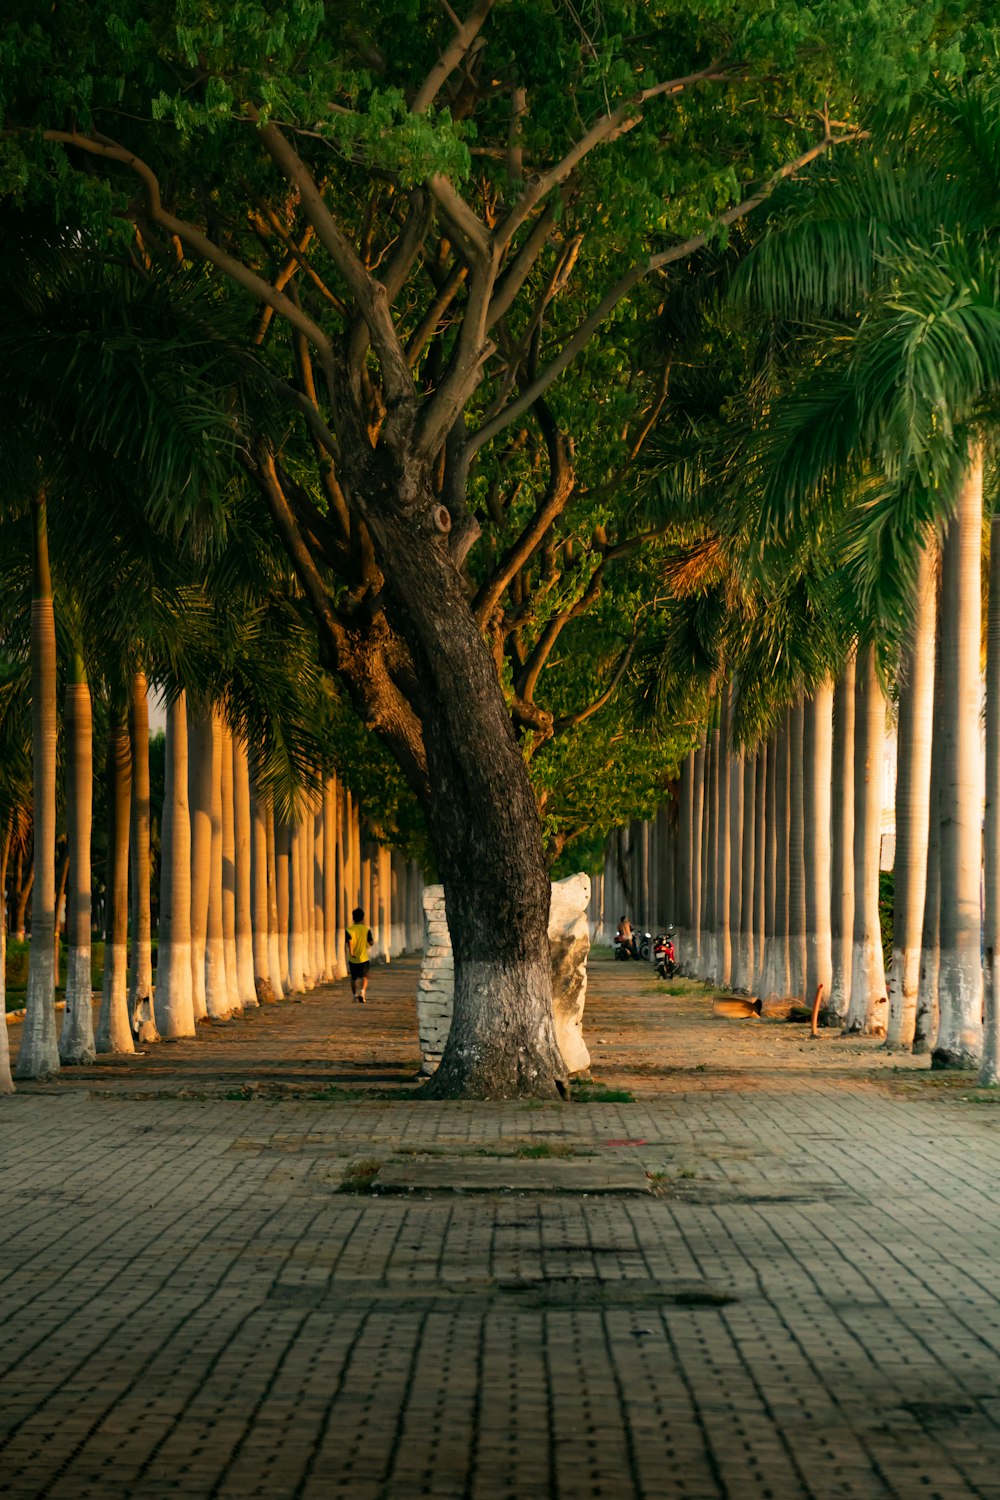 a row of palm trees on a brick walkway